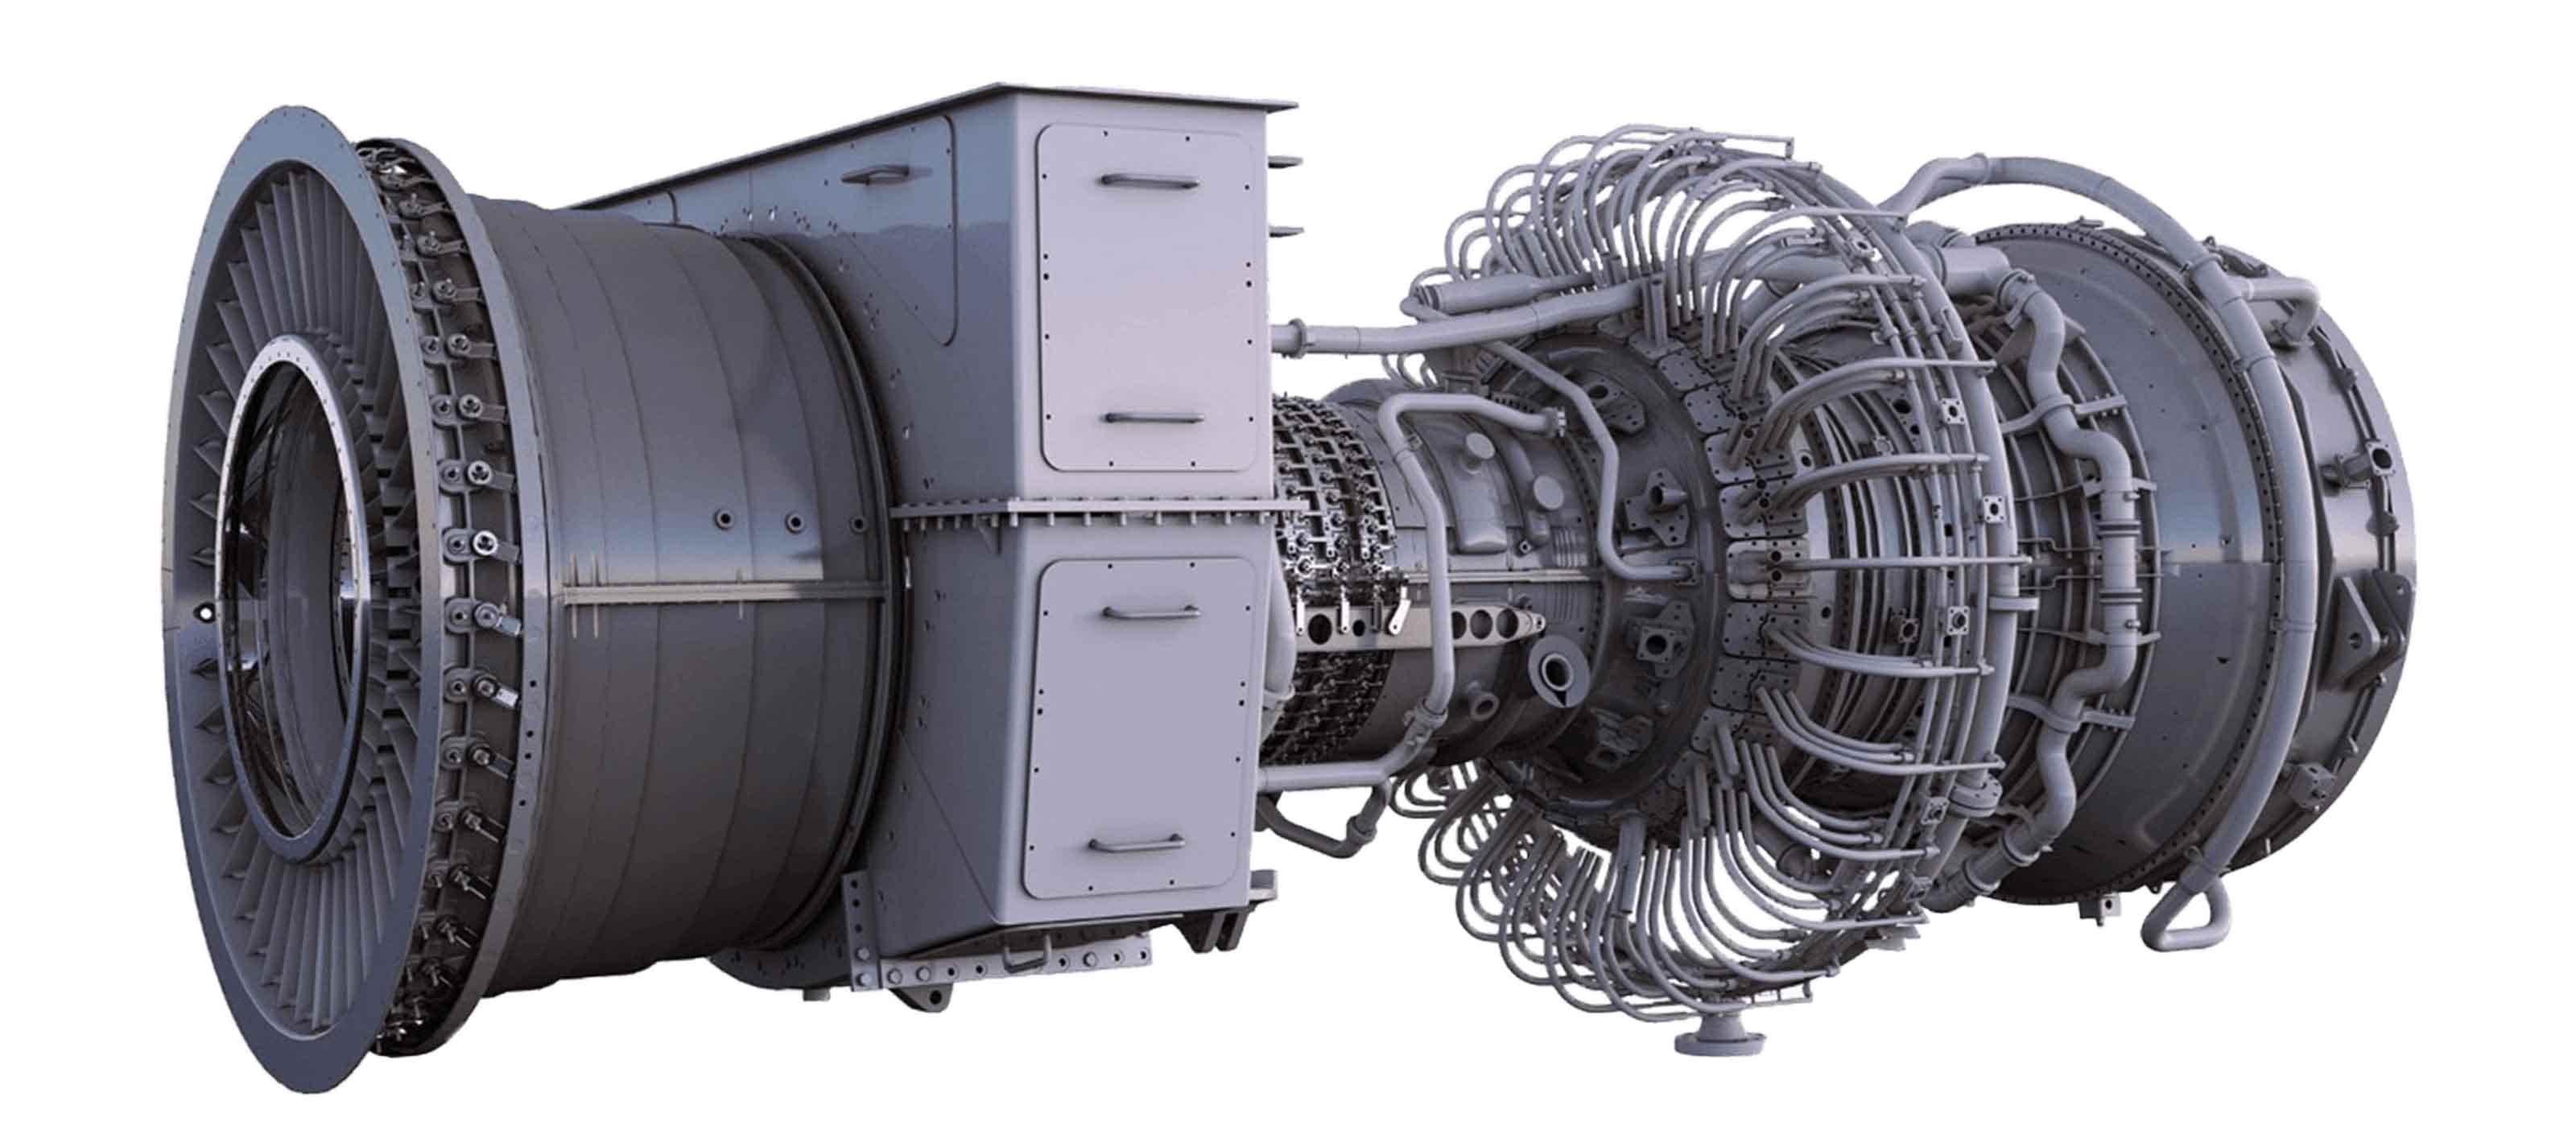 Autonomous tuning software for operations performance management on aeroderivative turbines